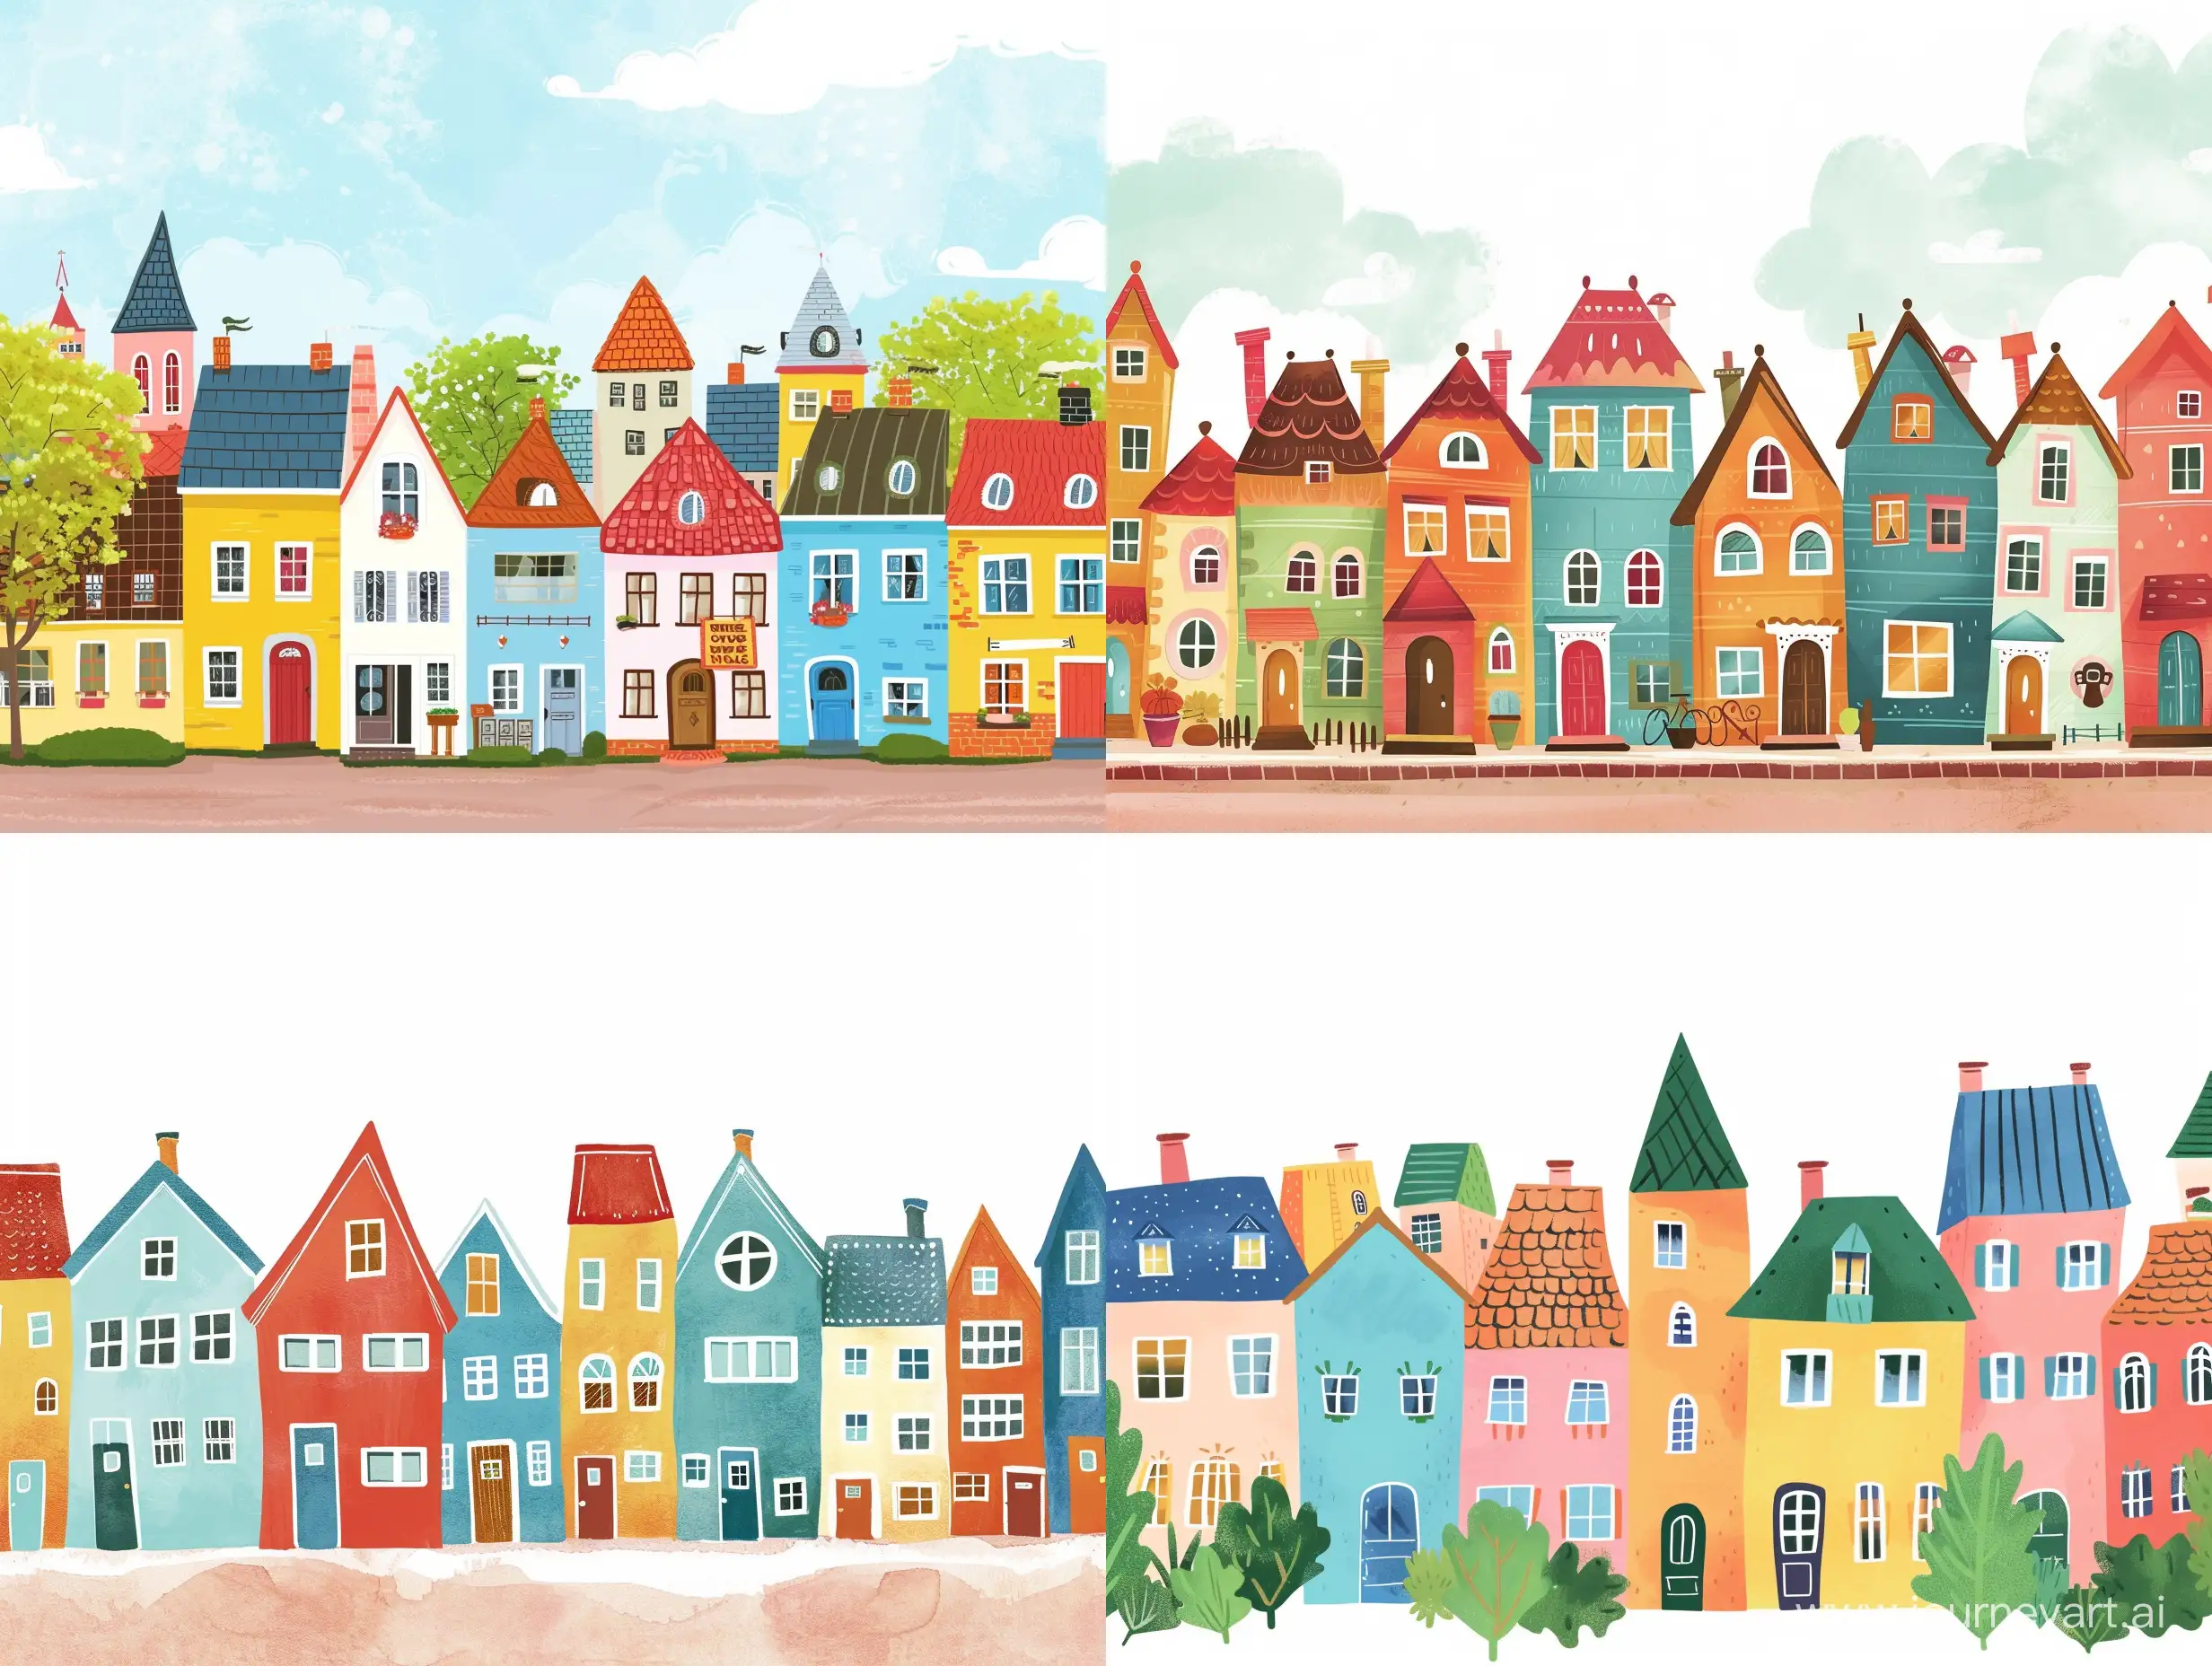 Vibrant-Townscape-with-Illustration-Style-Houses